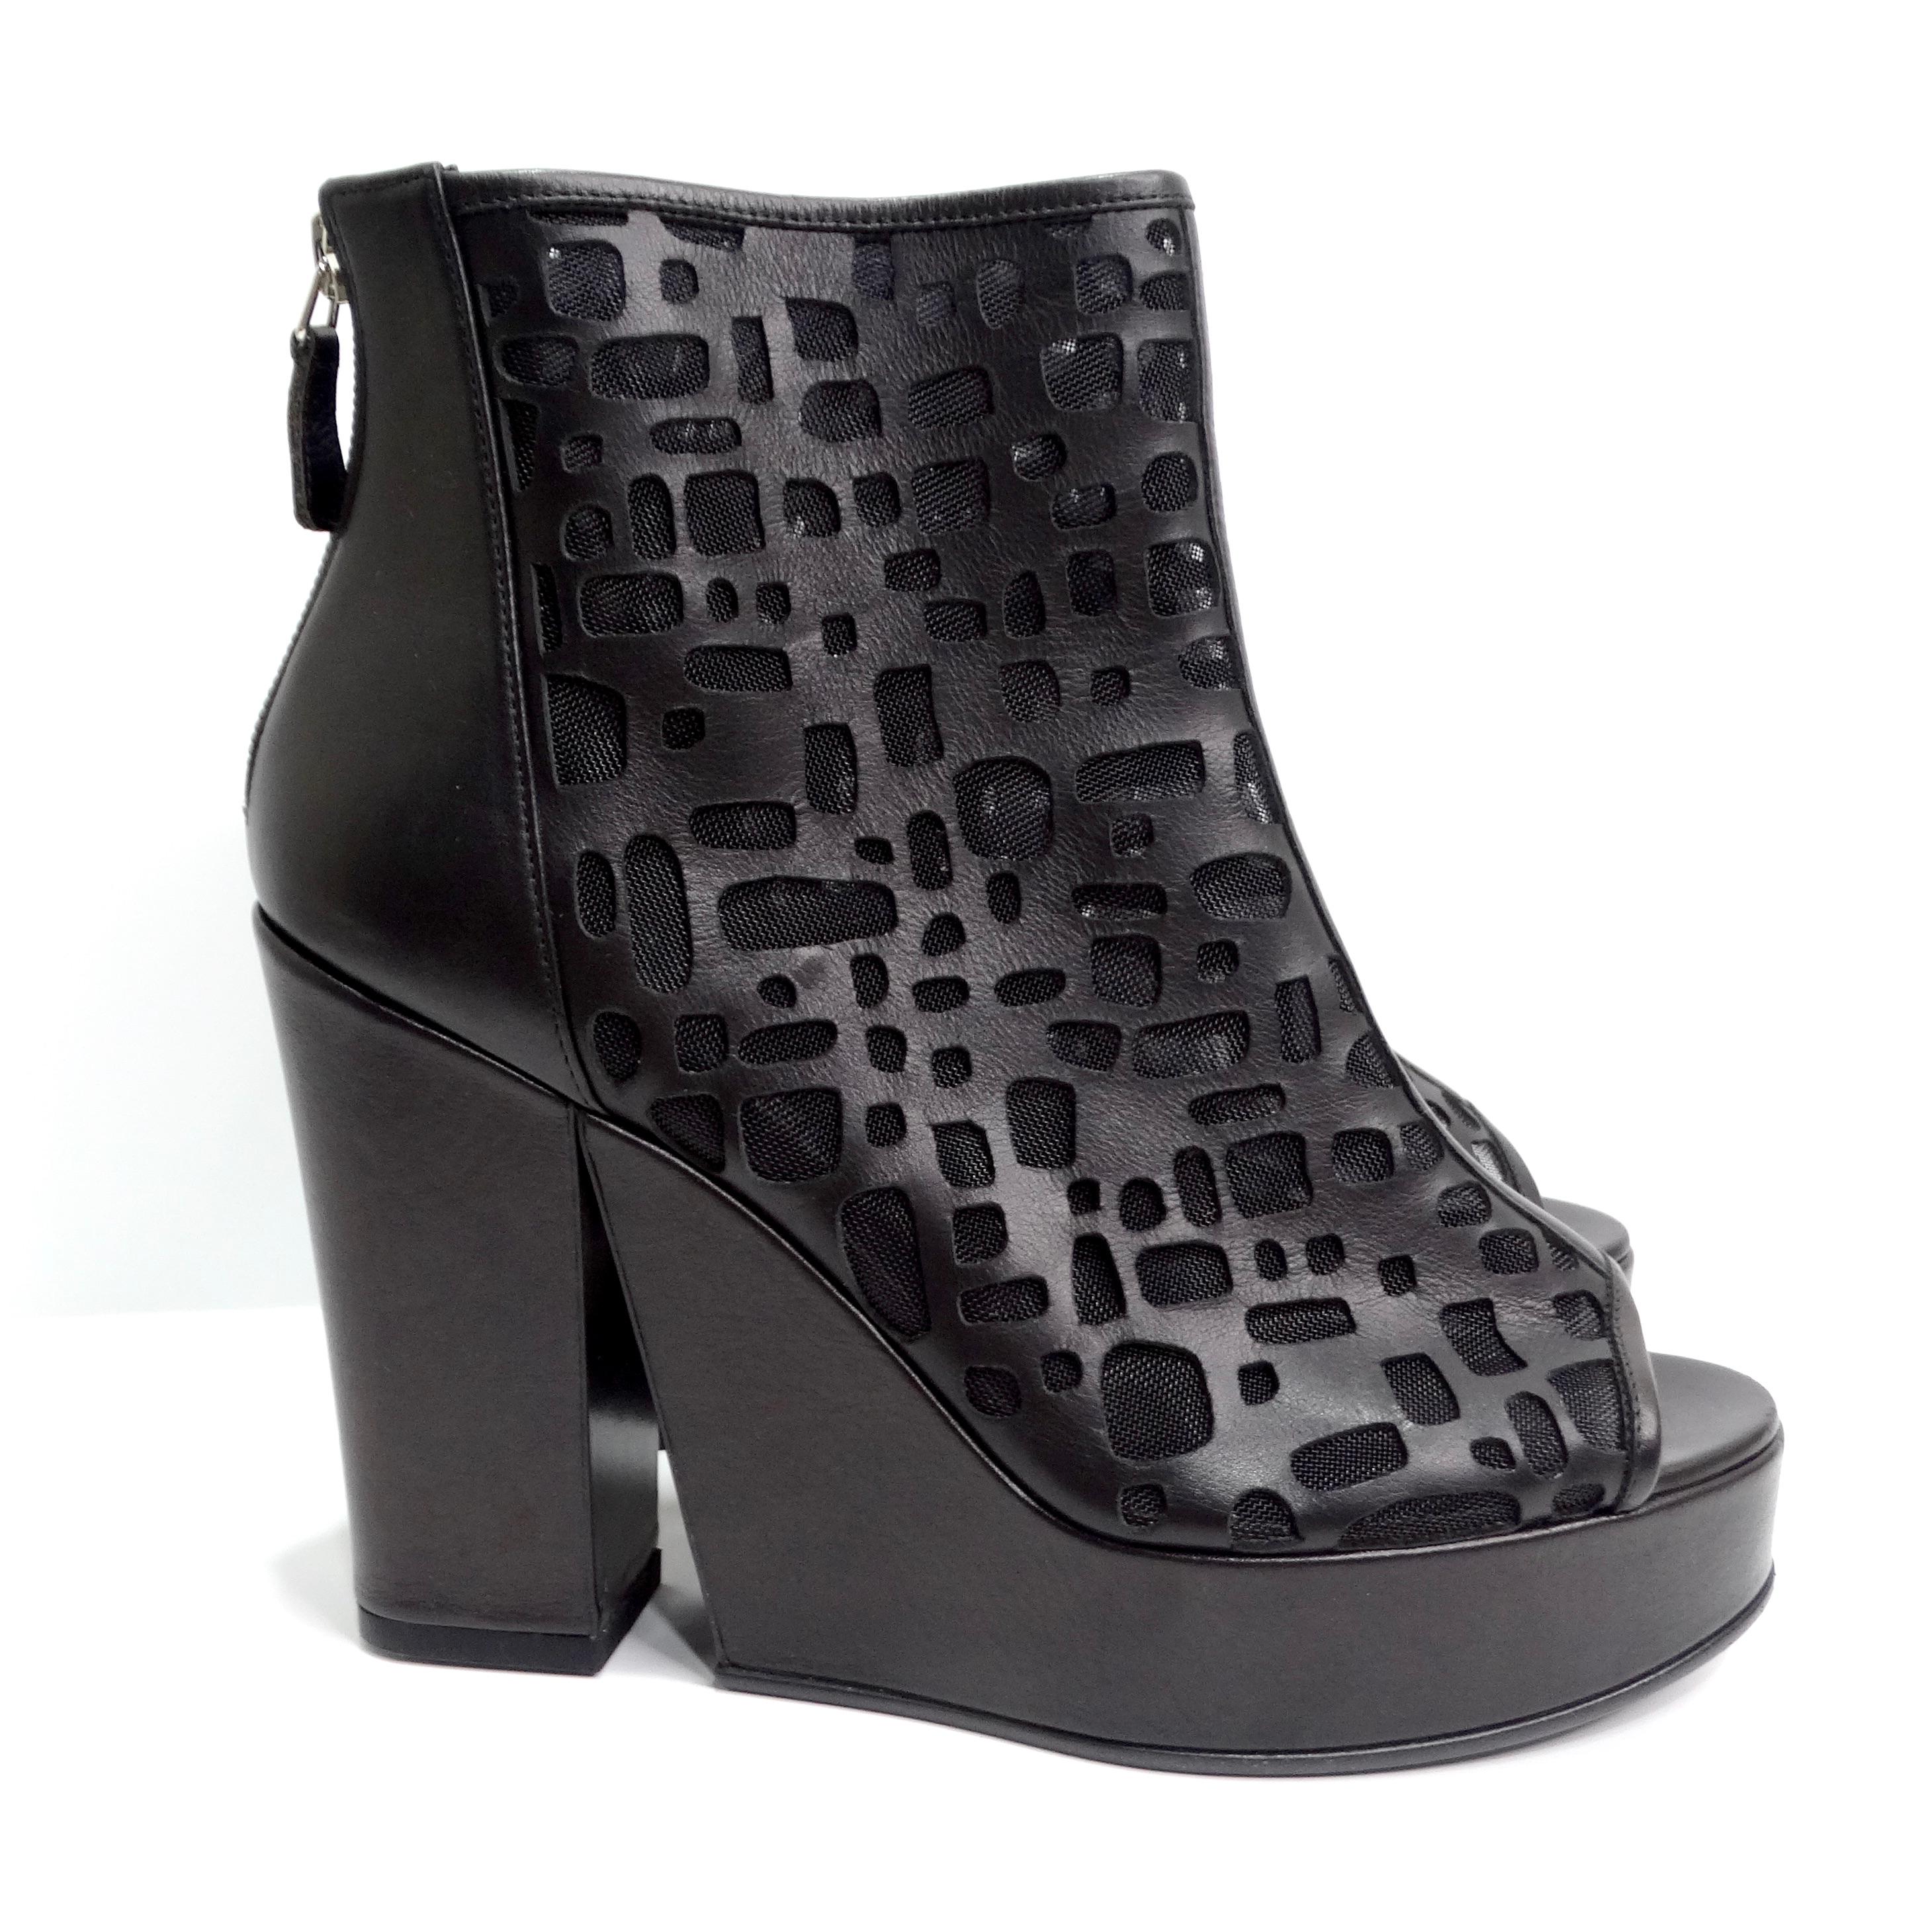 Women's or Men's Chanel Black Leather Mesh Cut-Out Peep Toe Platform Ankle Boots For Sale